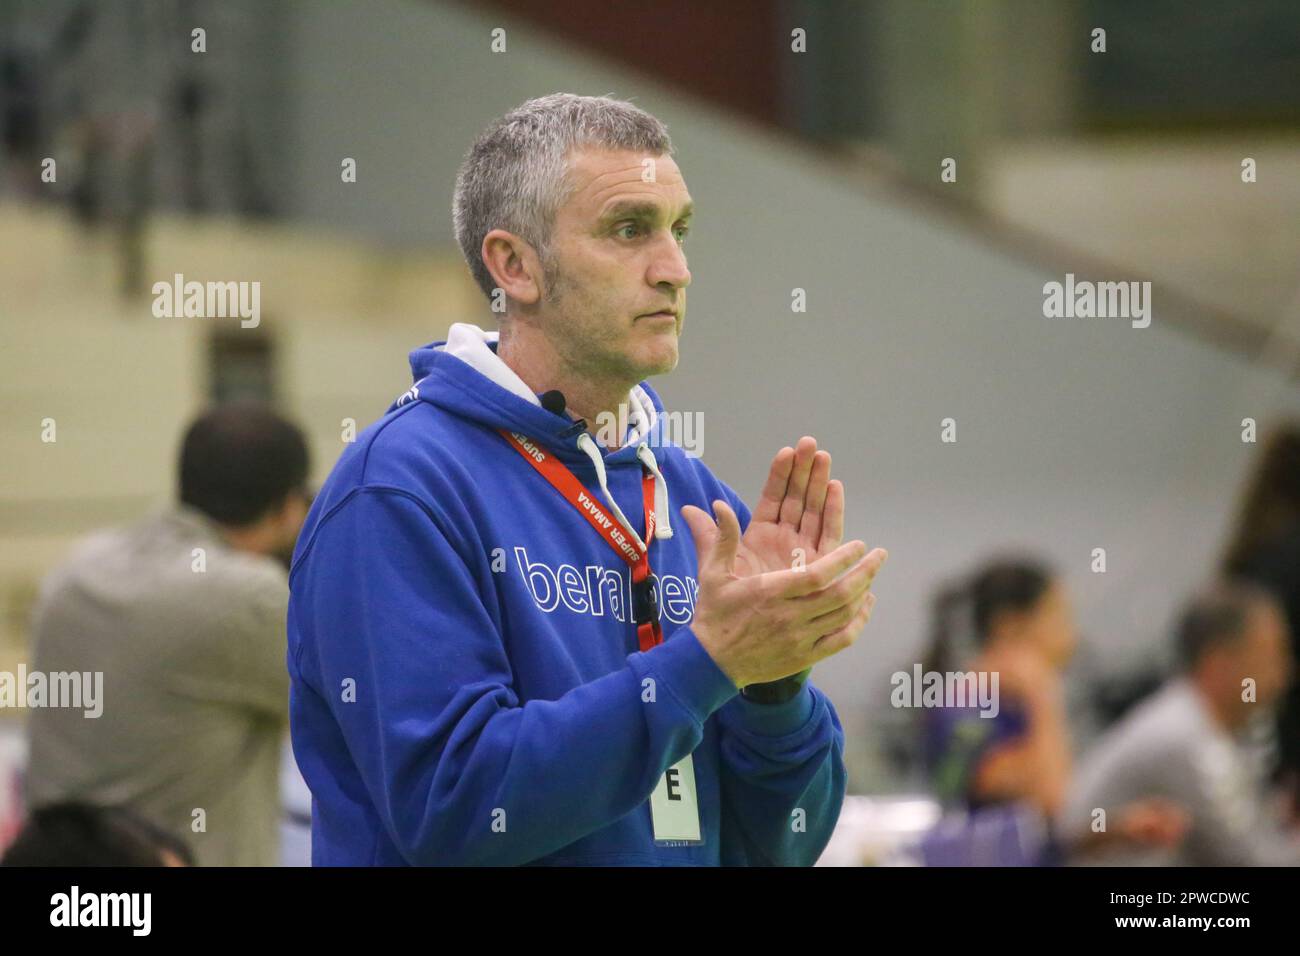 Gijon, Spain. 28th Apr, 2023. The coach of Super Amara Bera Bera, Imanol Alvarez during the first leg of the quarterfinals of the Final Phase of the Iberdrola League 2022-23 between Motive.co Gijon and Super Amara Bera Bera, on April 28, 2023, at the La Arena Sports Pavilion, in Gijon, Spain. (Photo by Alberto Brevers/Pacific Press) Credit: Pacific Press Media Production Corp./Alamy Live News Stock Photo